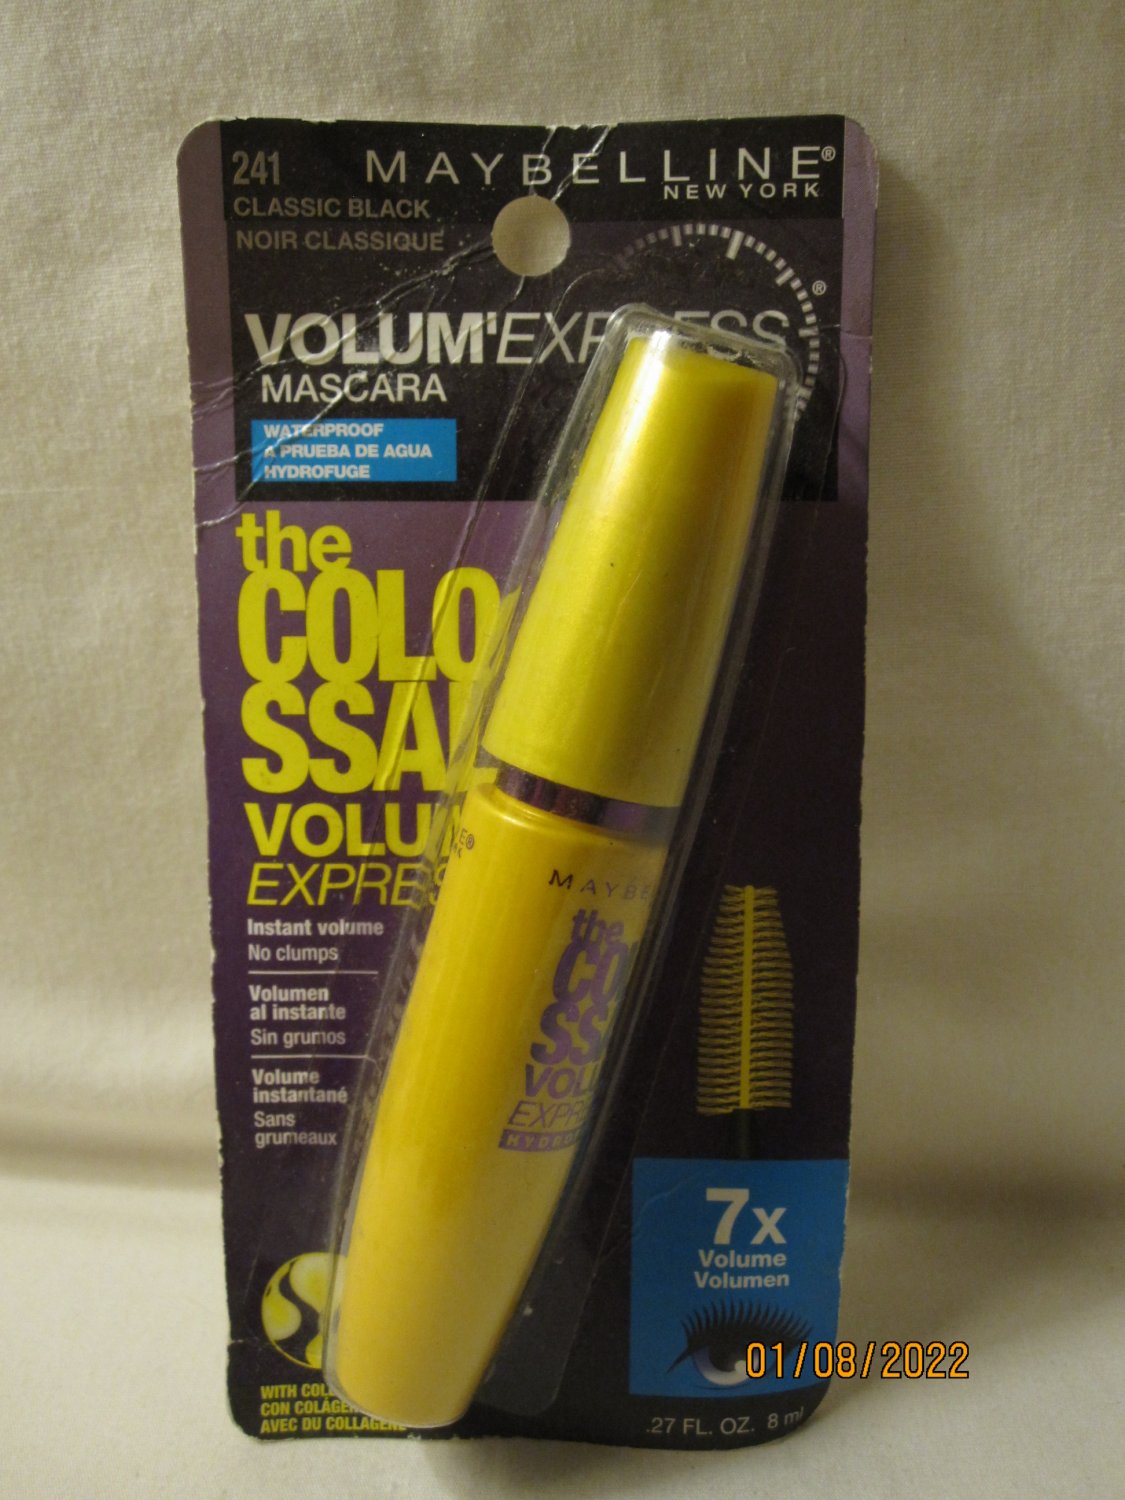 Make-Up: Maybelline Volum'Express Mascara: The Colossal: #241 Classic Black